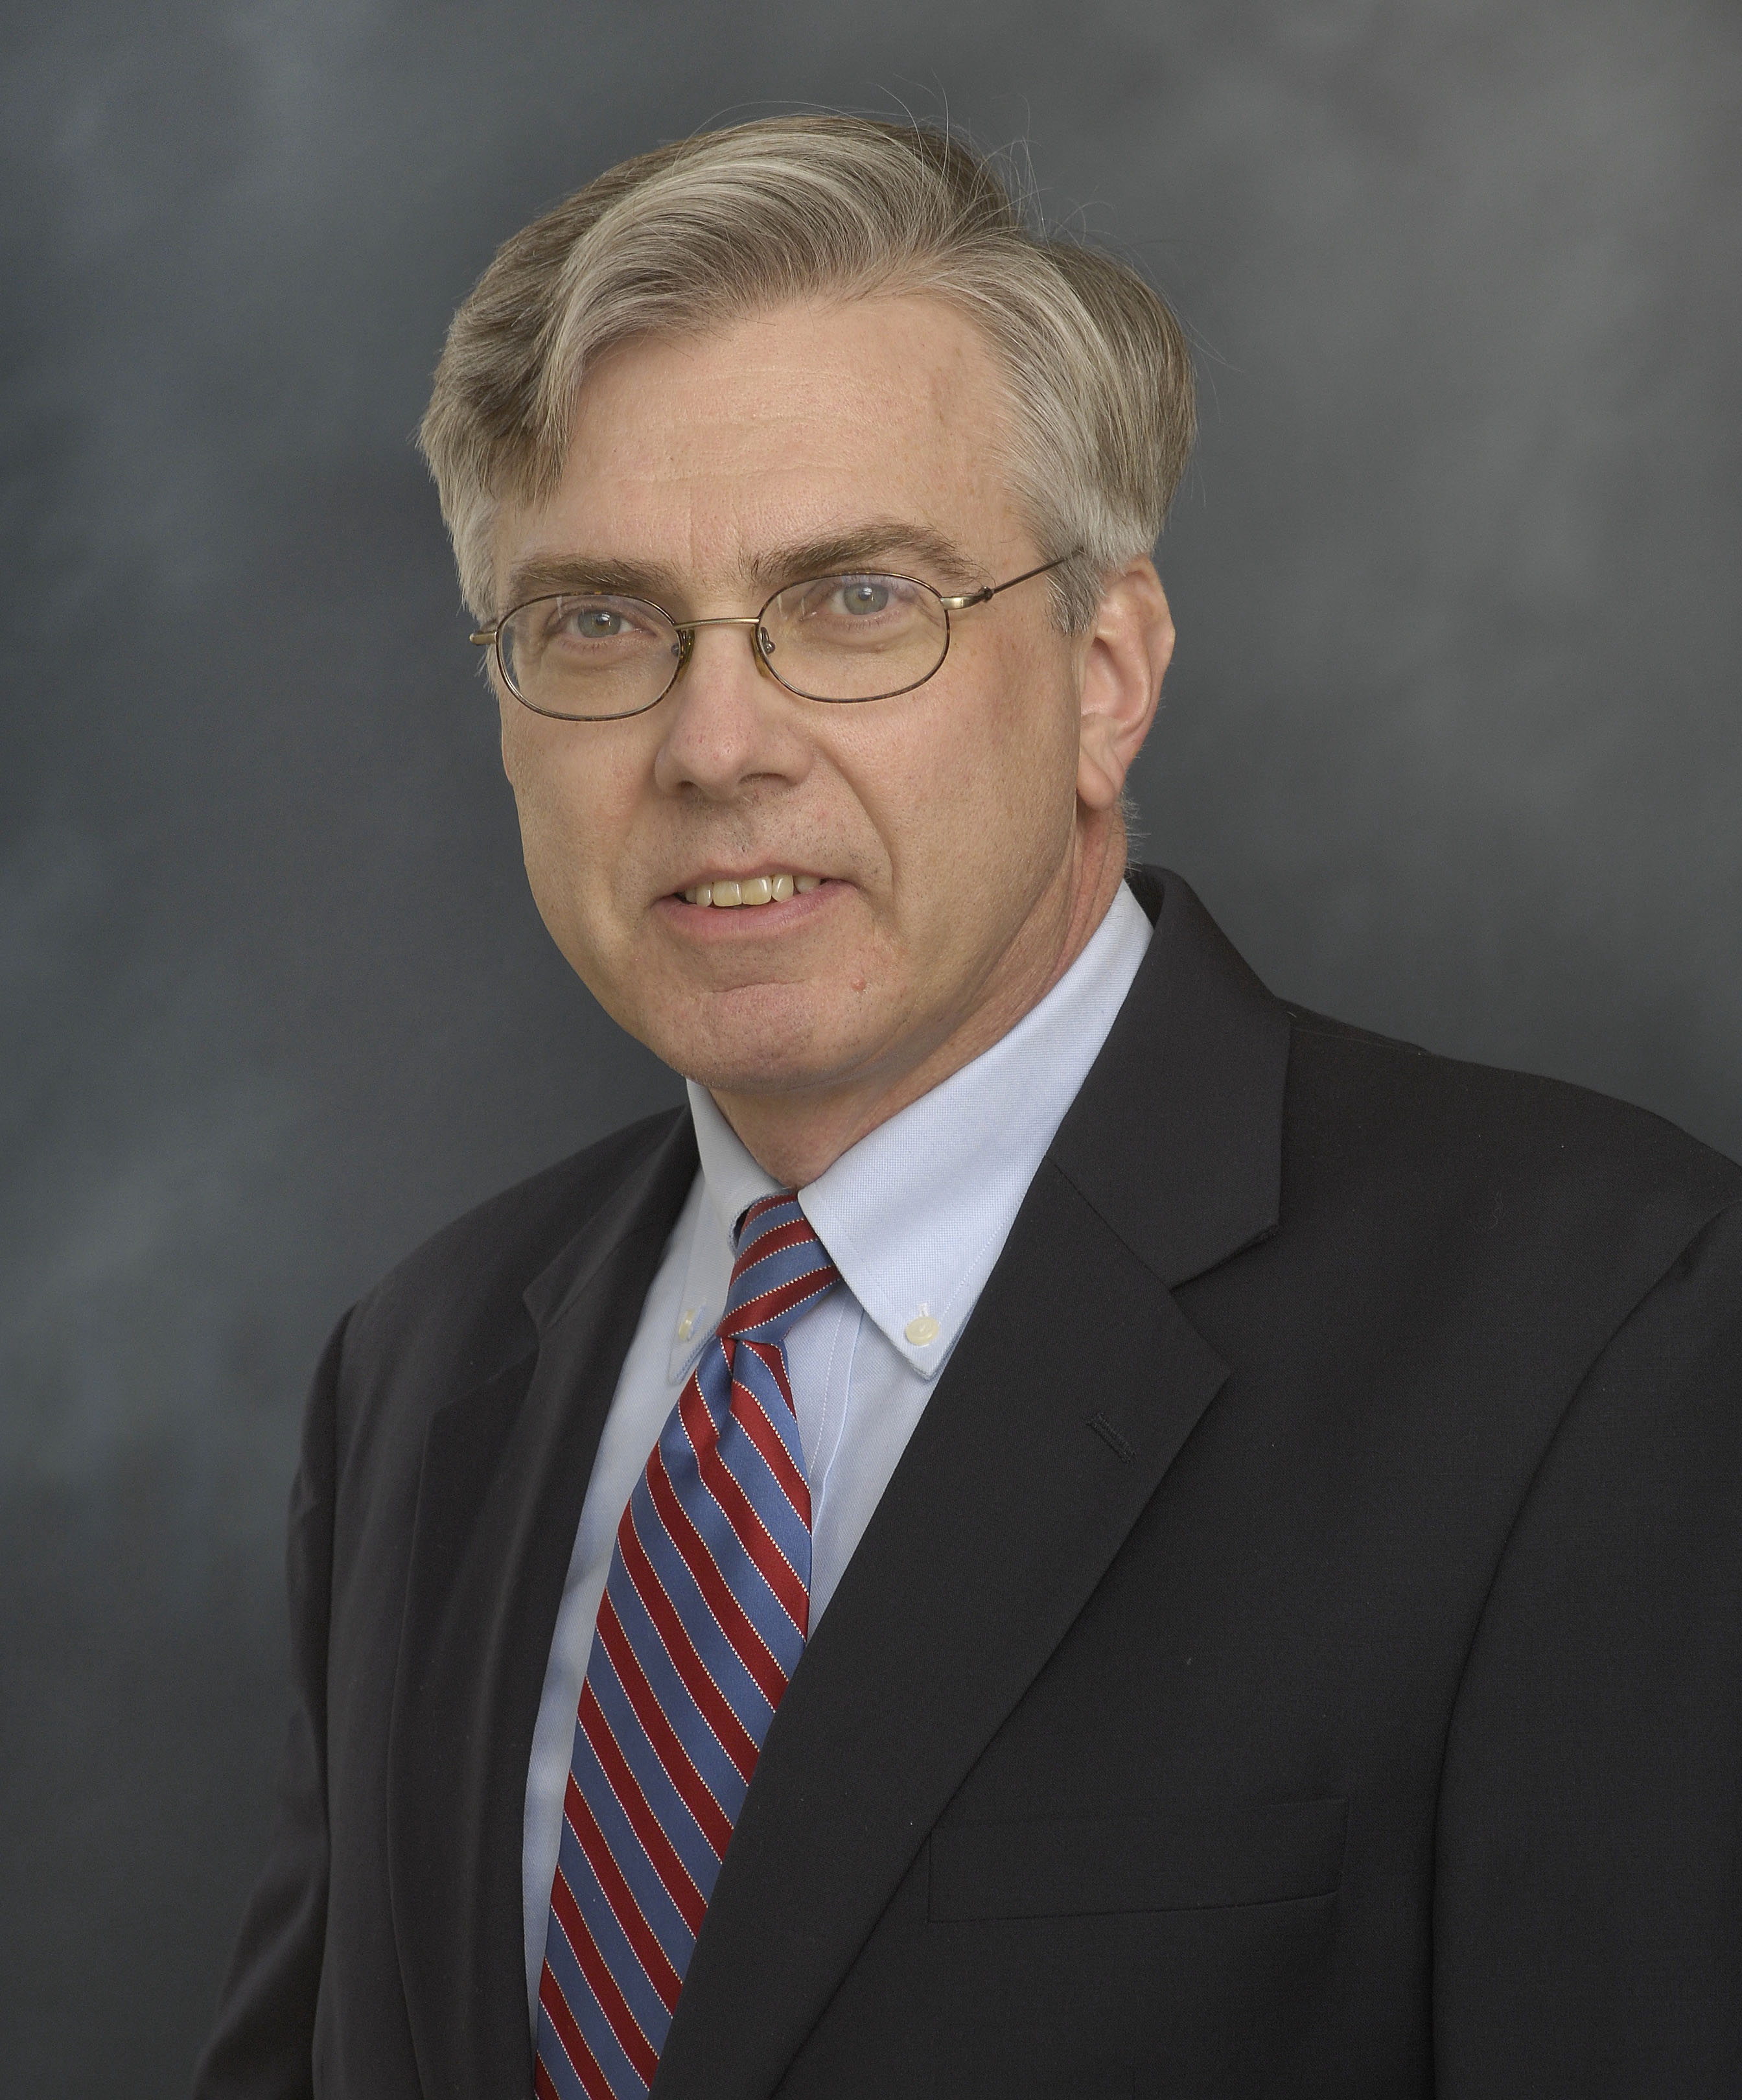 Dr. William J. Lindblad is a professor of pharmacology at the Husson University School of Pharmacy and director of Husson University’s Office of Research and Scholarship.